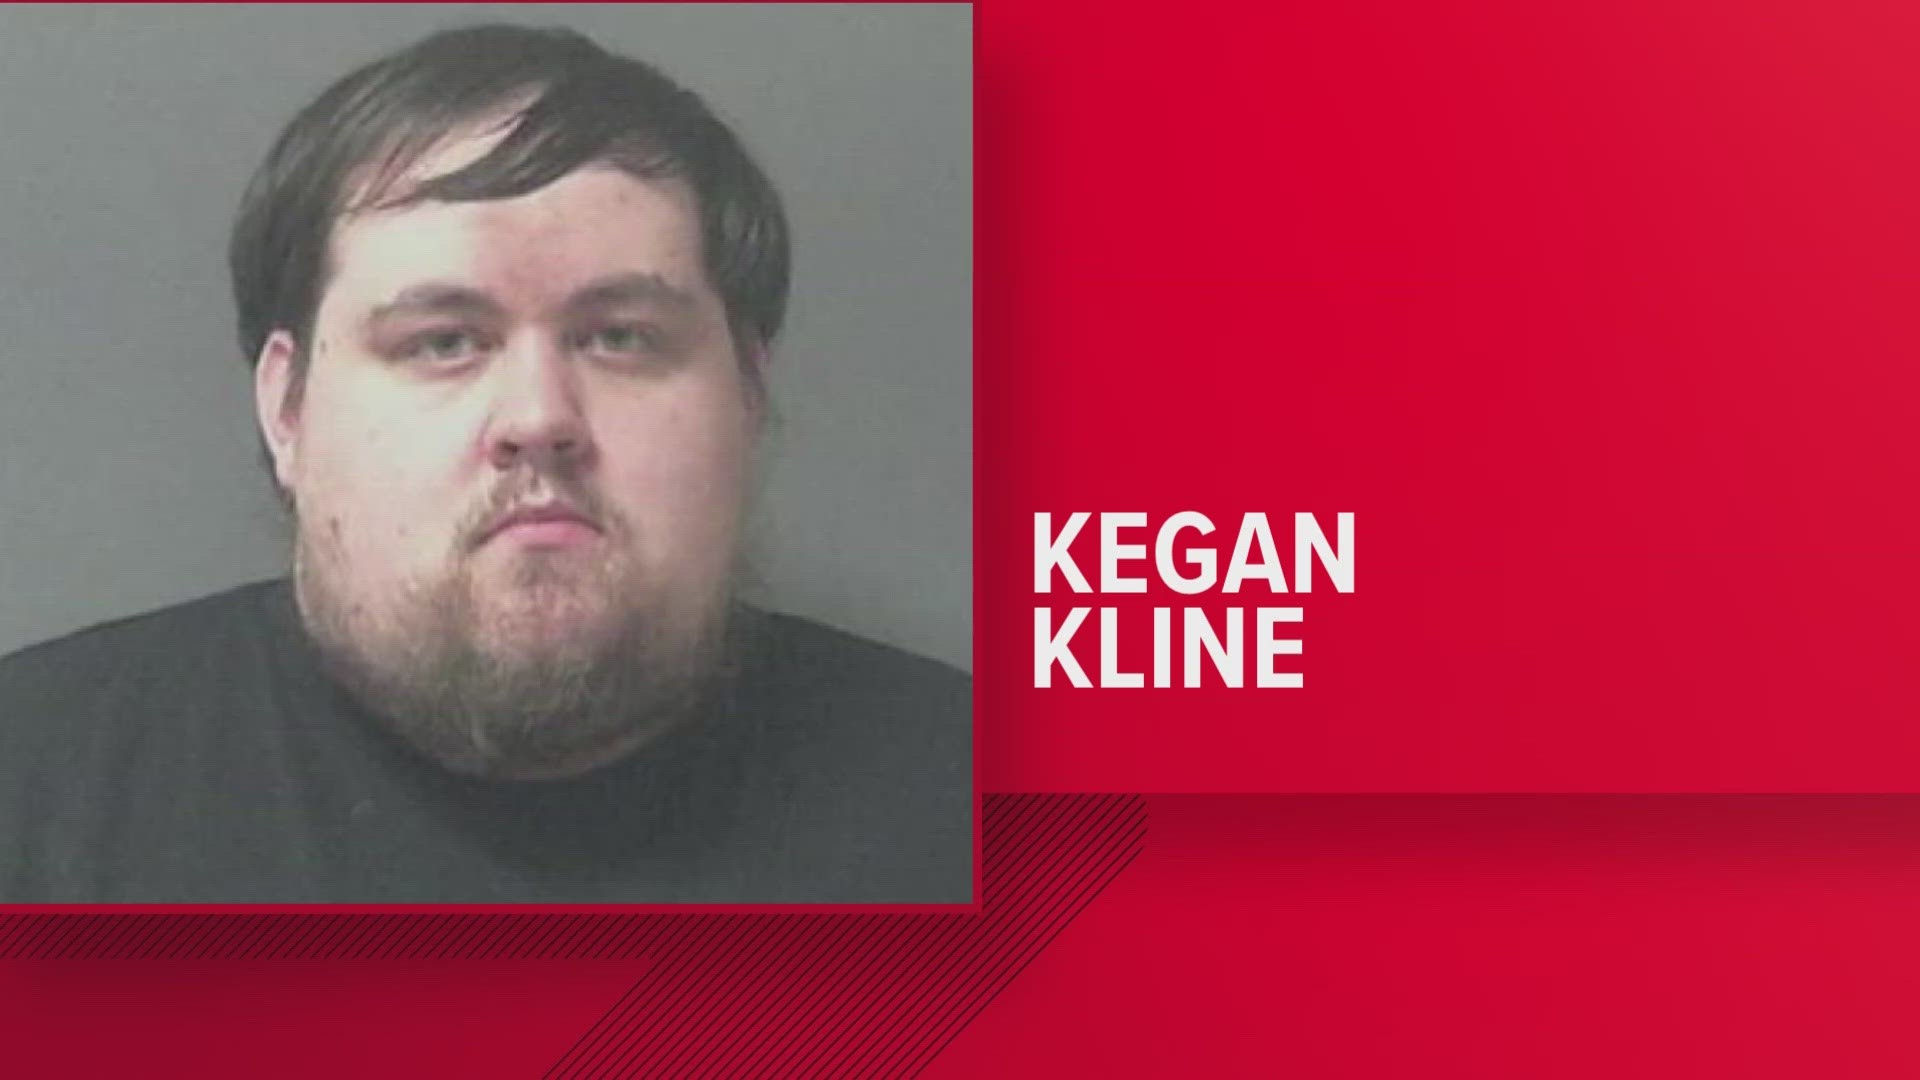 Kegan Kline admitted to creating the fake Anthony Shots profile online. Investigators say that account was one of the last to talk with Libby German in 2017